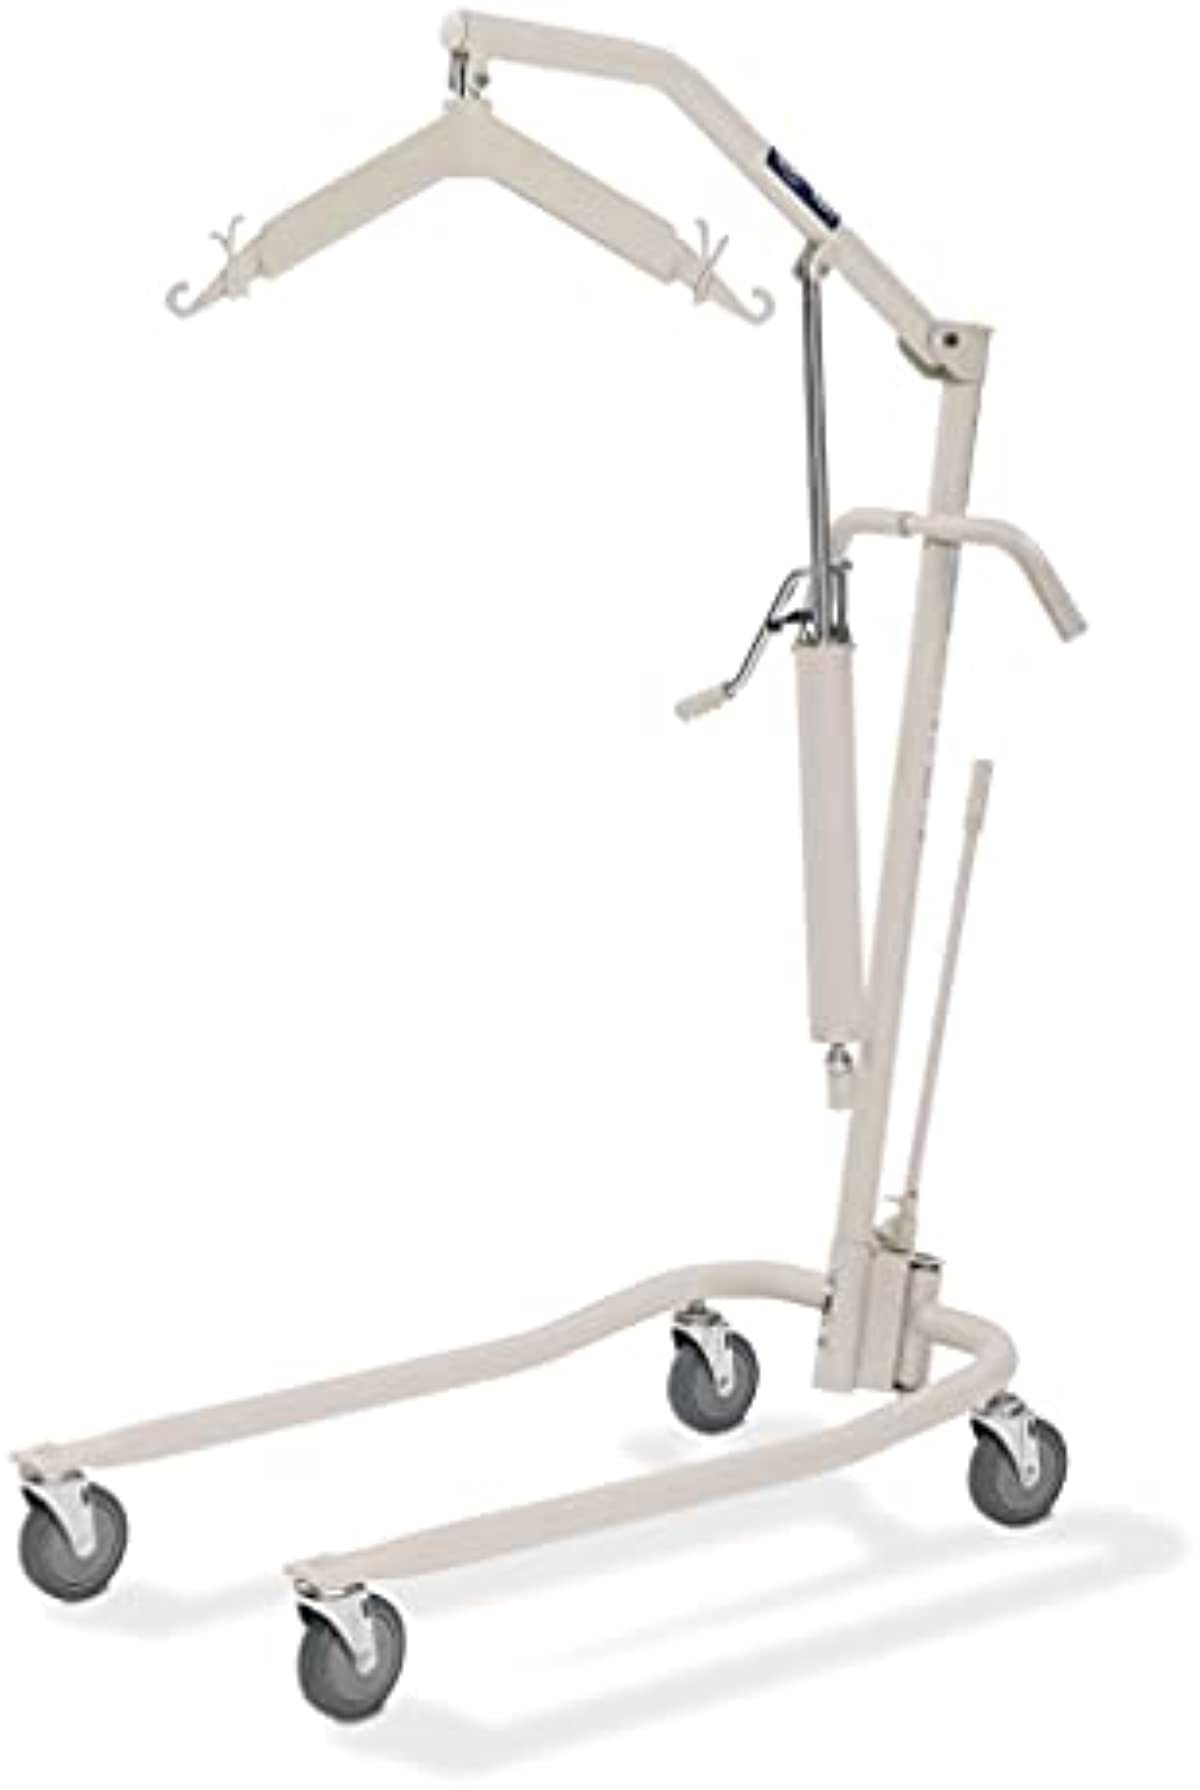 Invacare Painted Hydraulic Lift | 450 lbs. weight capacity | 9805P model